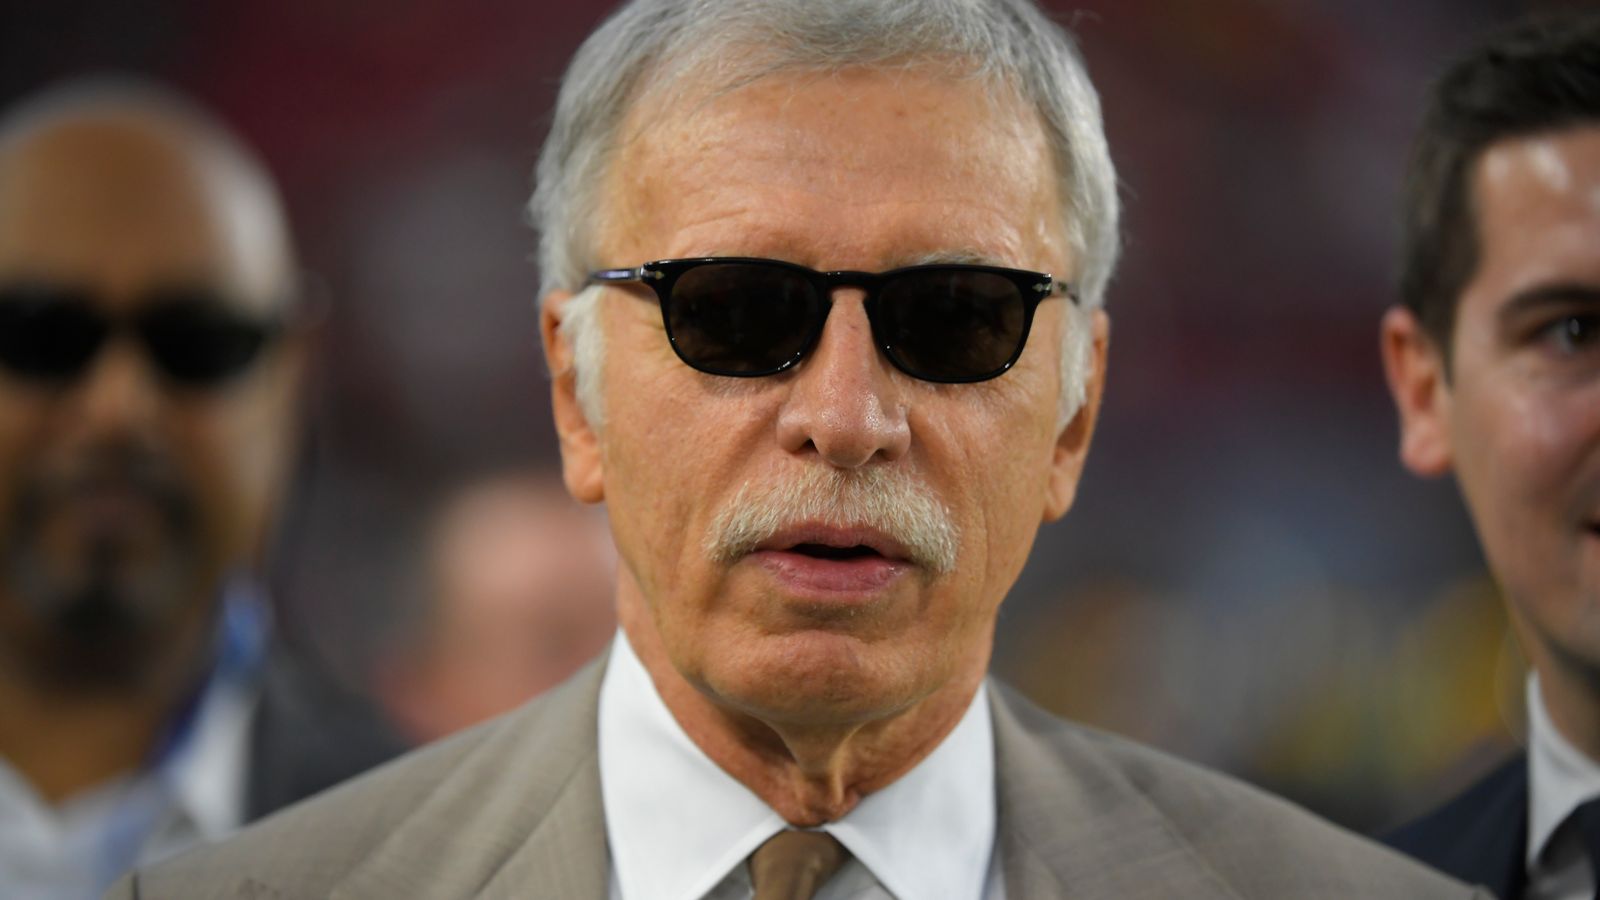 Super League: Mikel Arteta reveals Arsenal owner Stan Kroenke has apologised to him over failed plans | Football News | Sky Sports